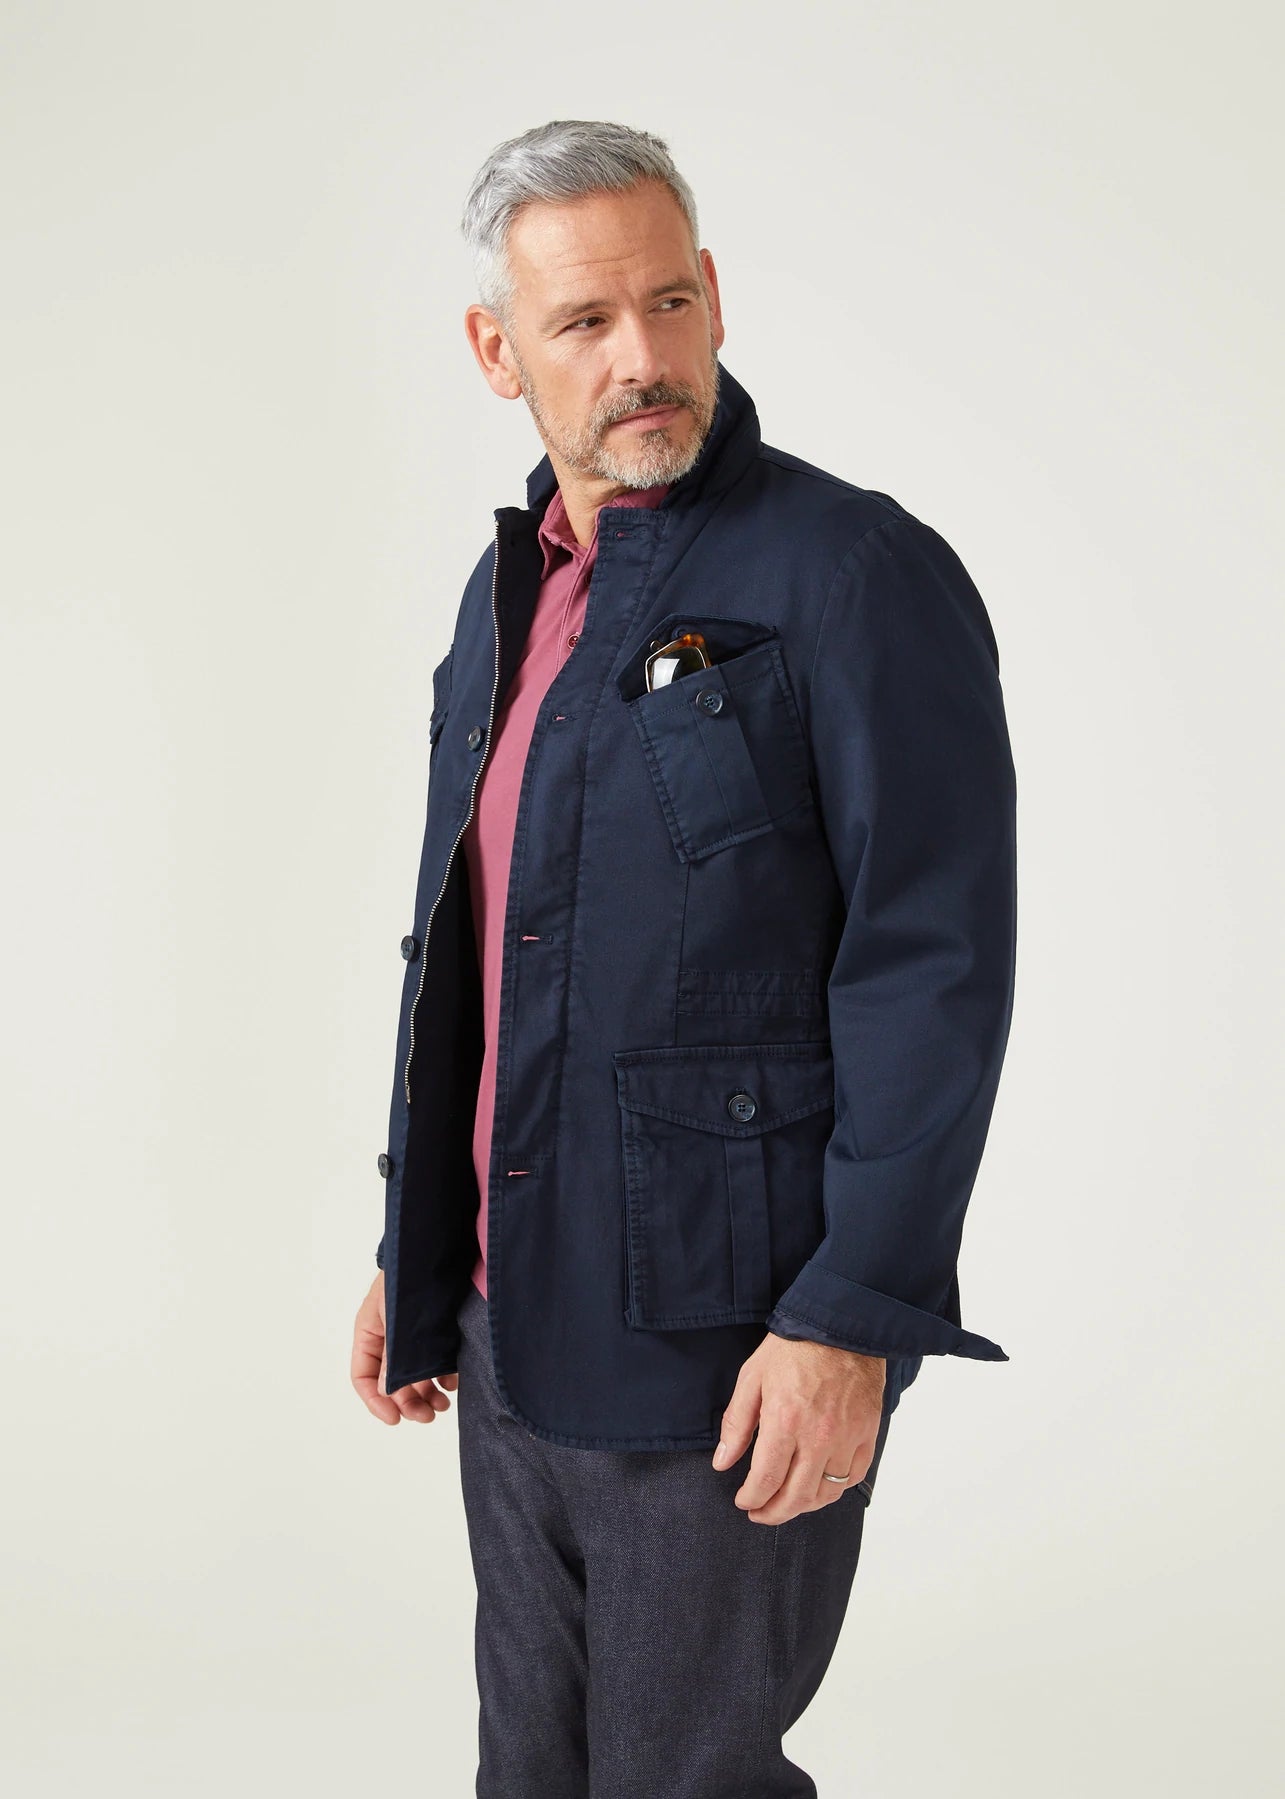 Casual American Jacket for Men Parkstone